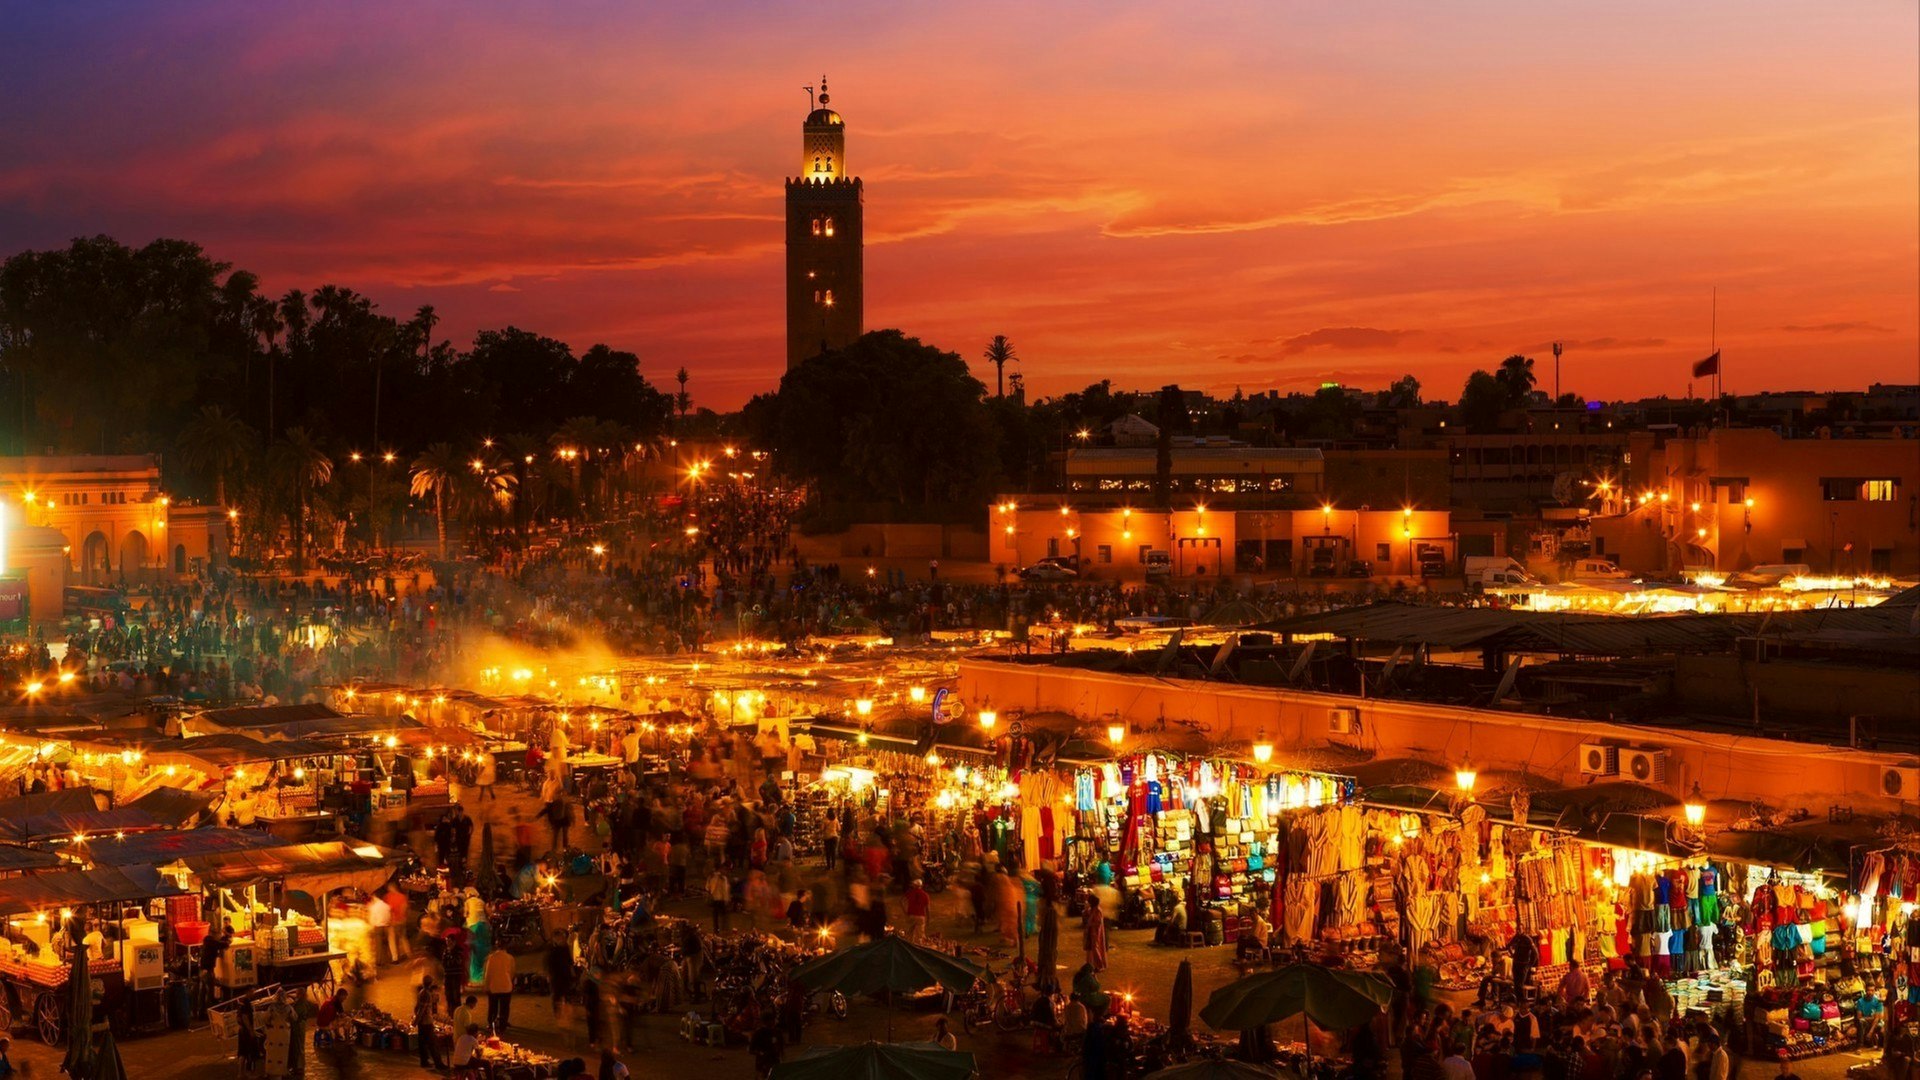 Djemaa el-Fnaa is a famous square and market place in Marrakesh's medina quarter